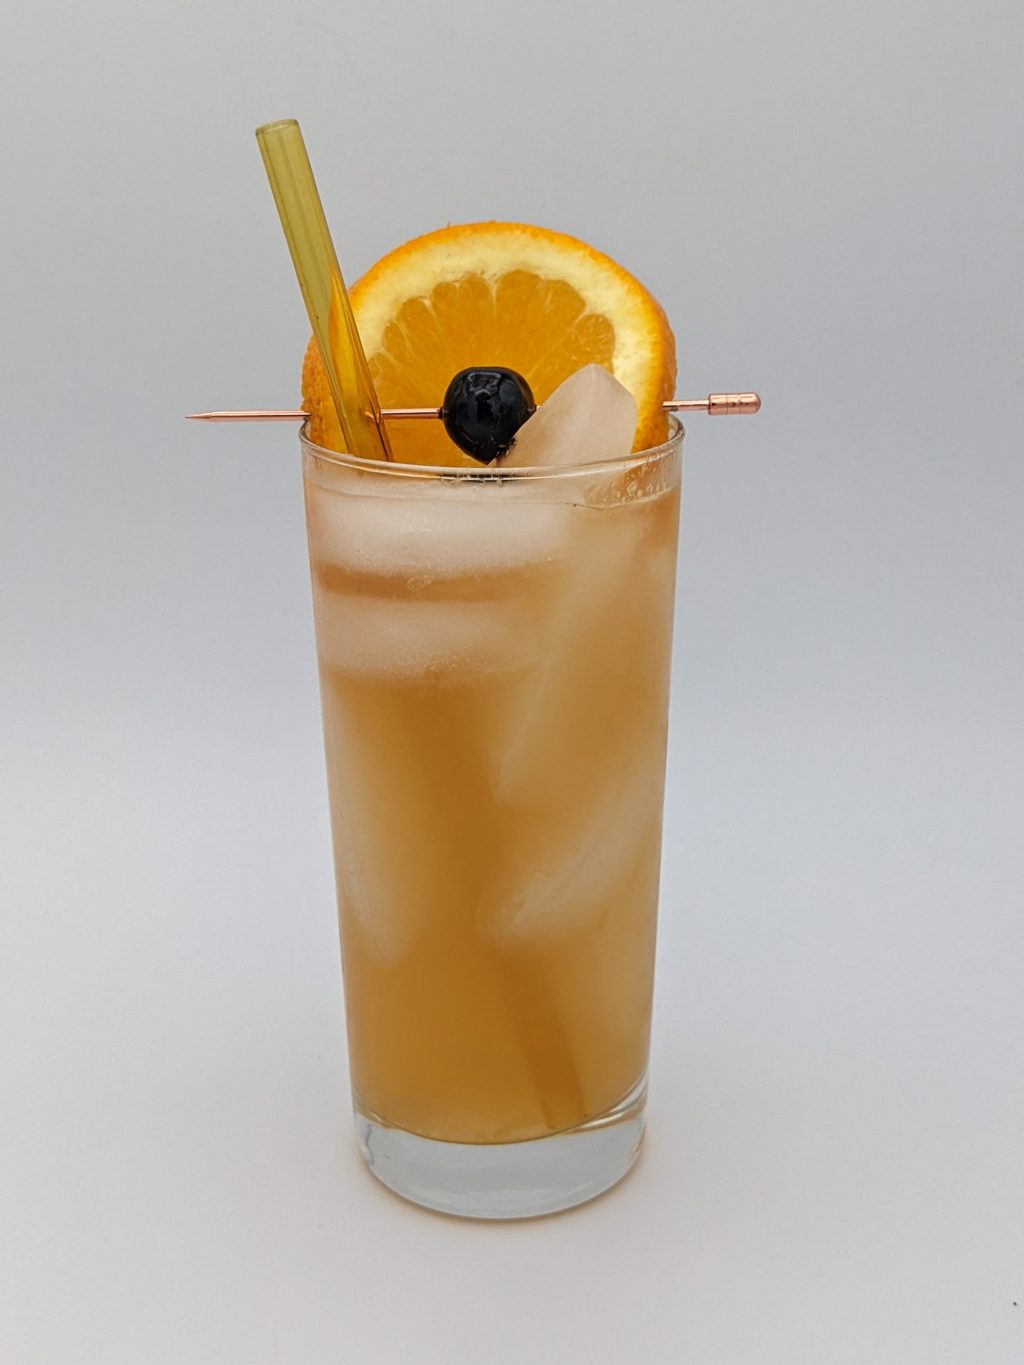 golden liquid in a collins glass filled with ice and garnished with a cherry and orange slice